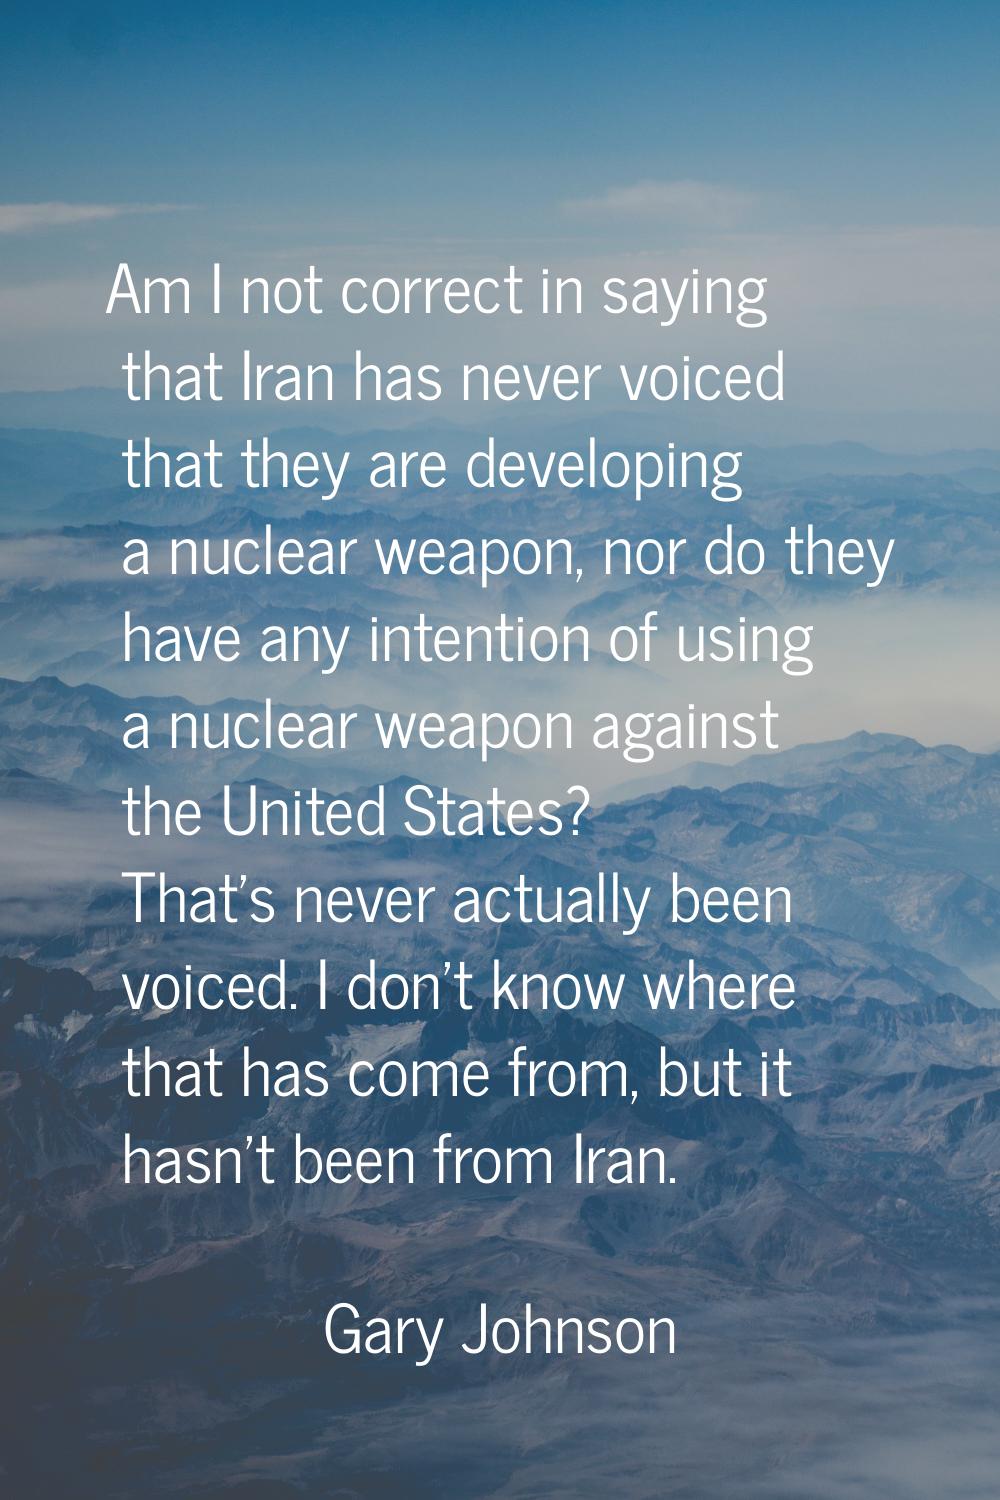 Am I not correct in saying that Iran has never voiced that they are developing a nuclear weapon, no